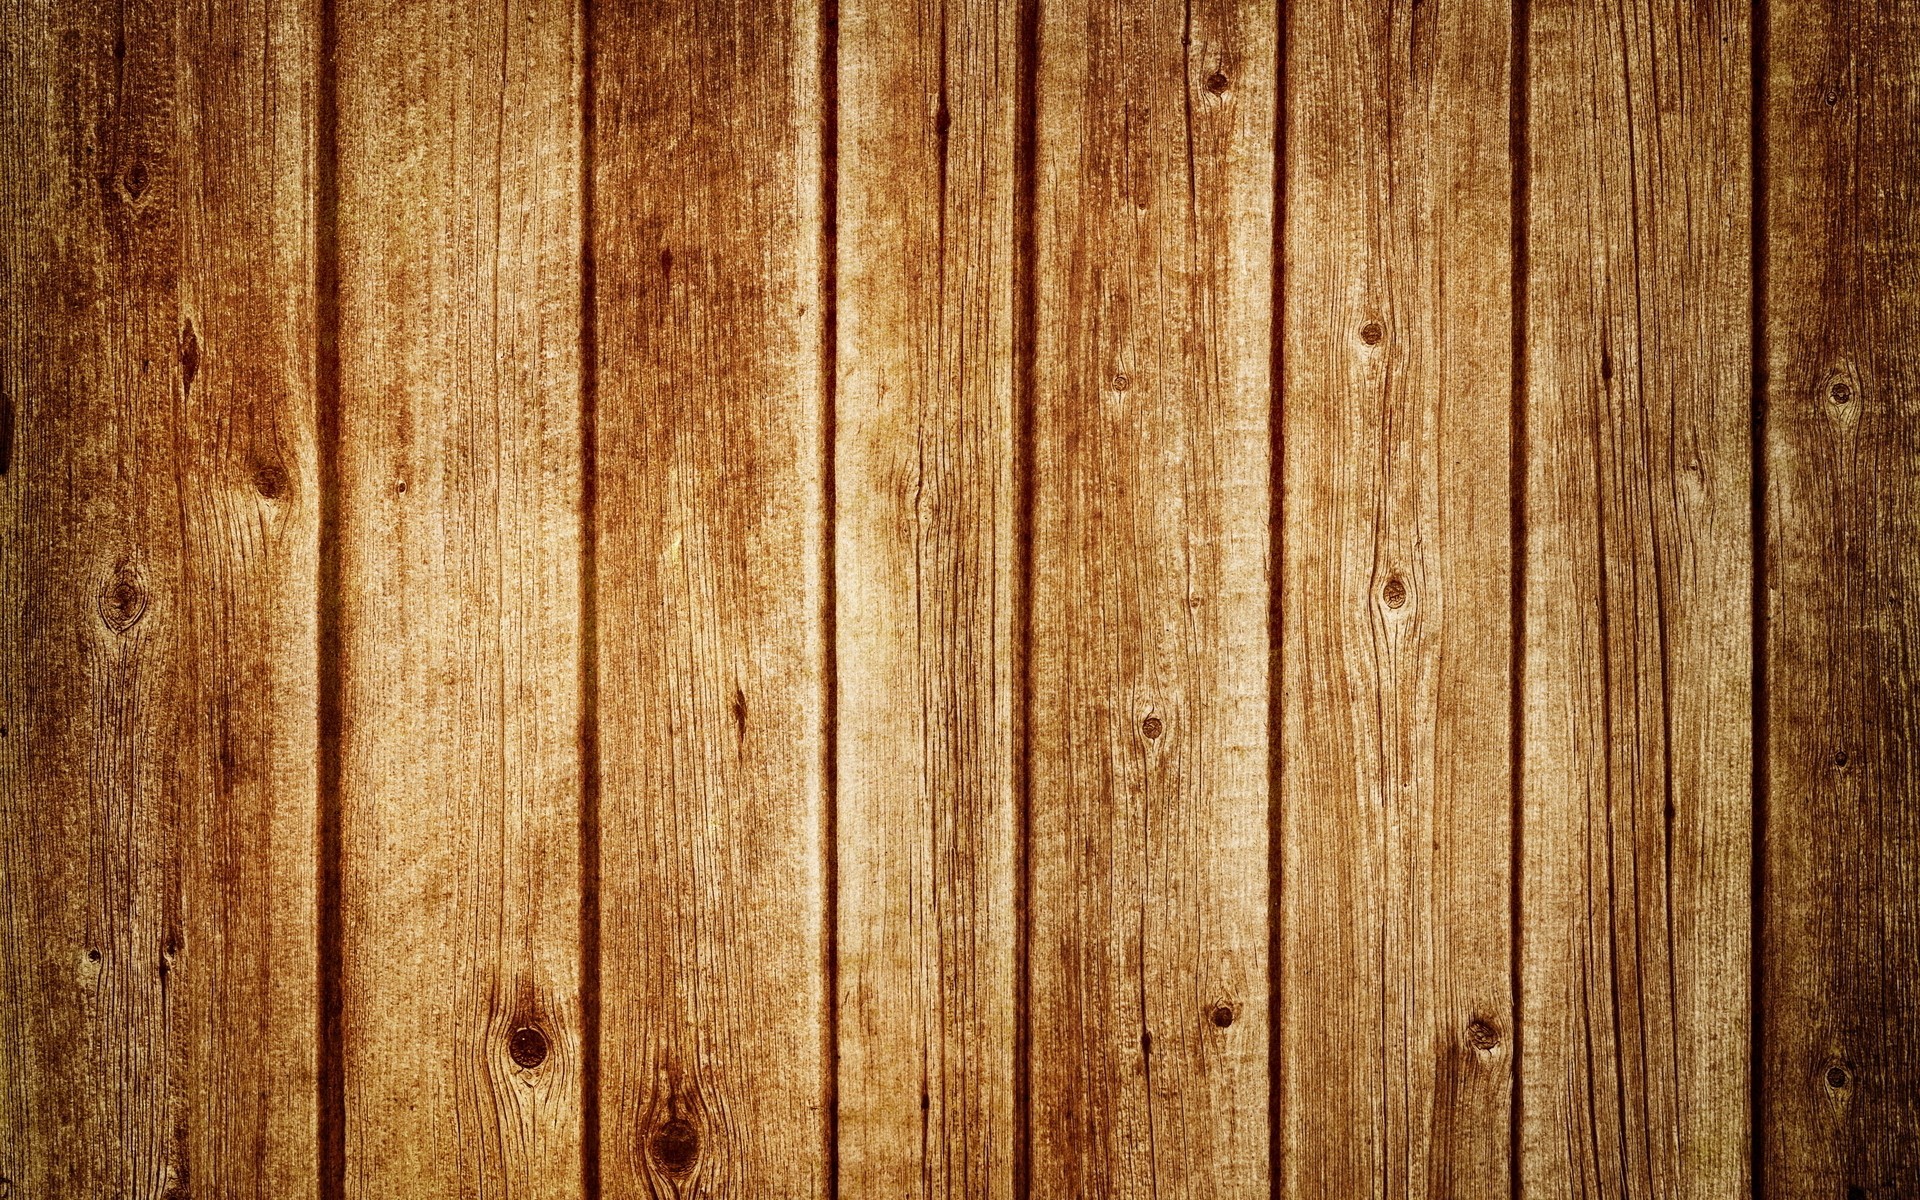 Texture Minimalism Wood Planks Wood Abstract Wooden Surface 1920x1200